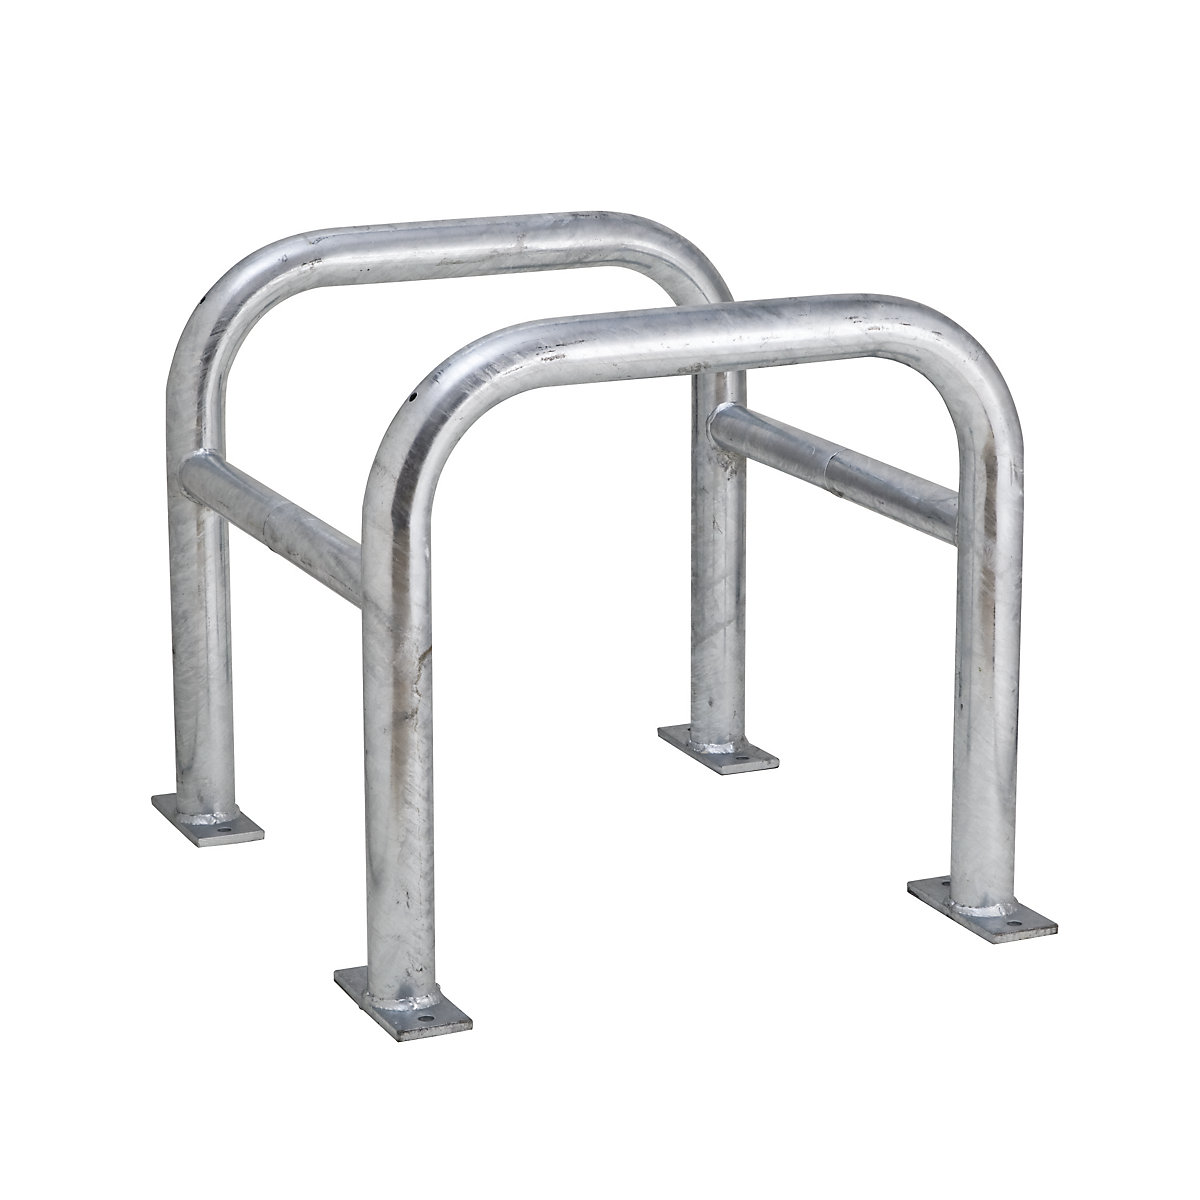 Crash protection for posts, zinc plated, HxWxD 600 x 620 x 620 mm